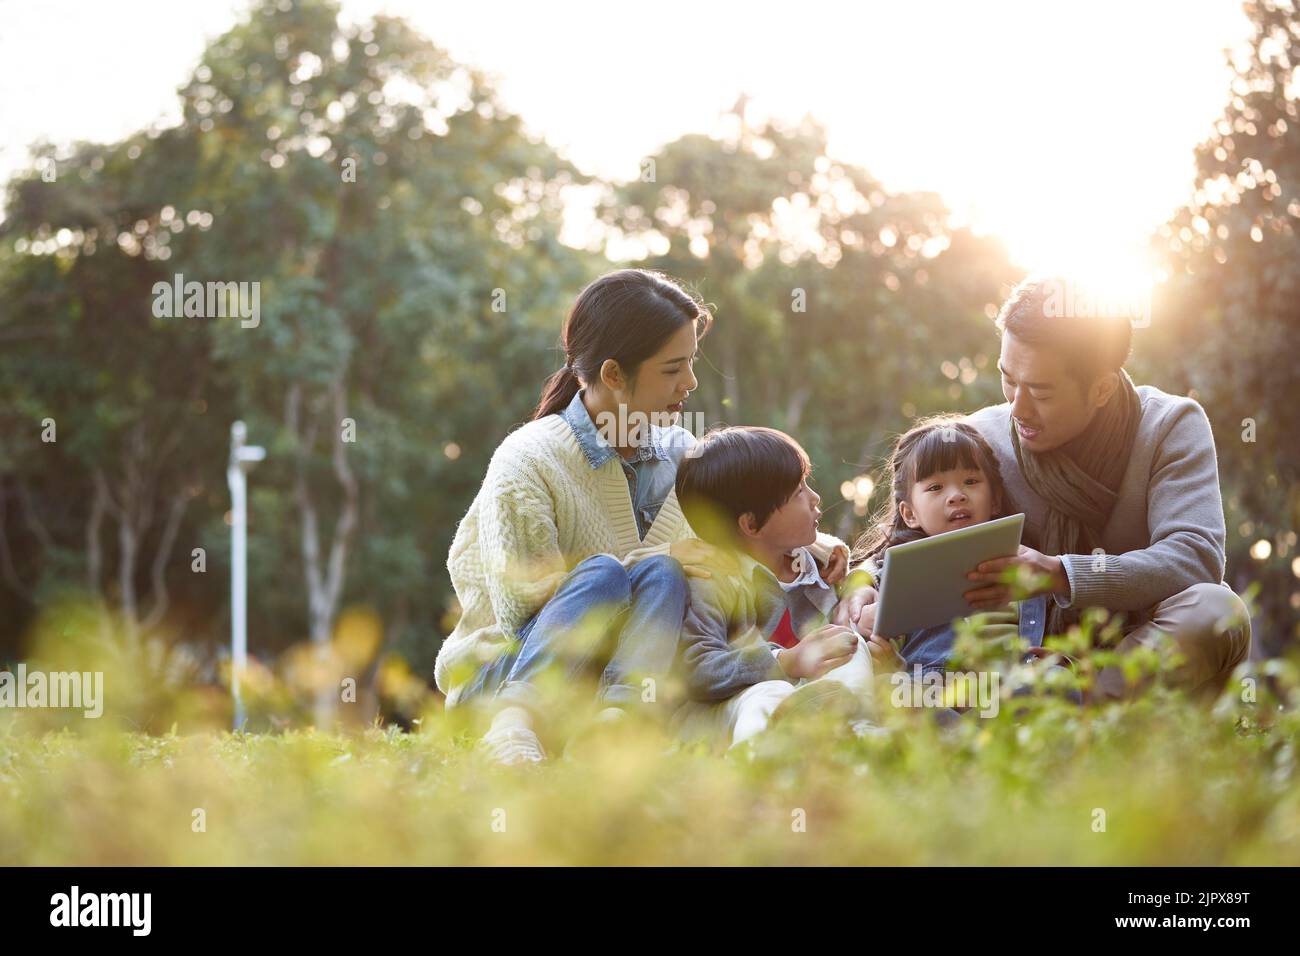 asian family with two children relaxing outdoors in city park Stock Photo